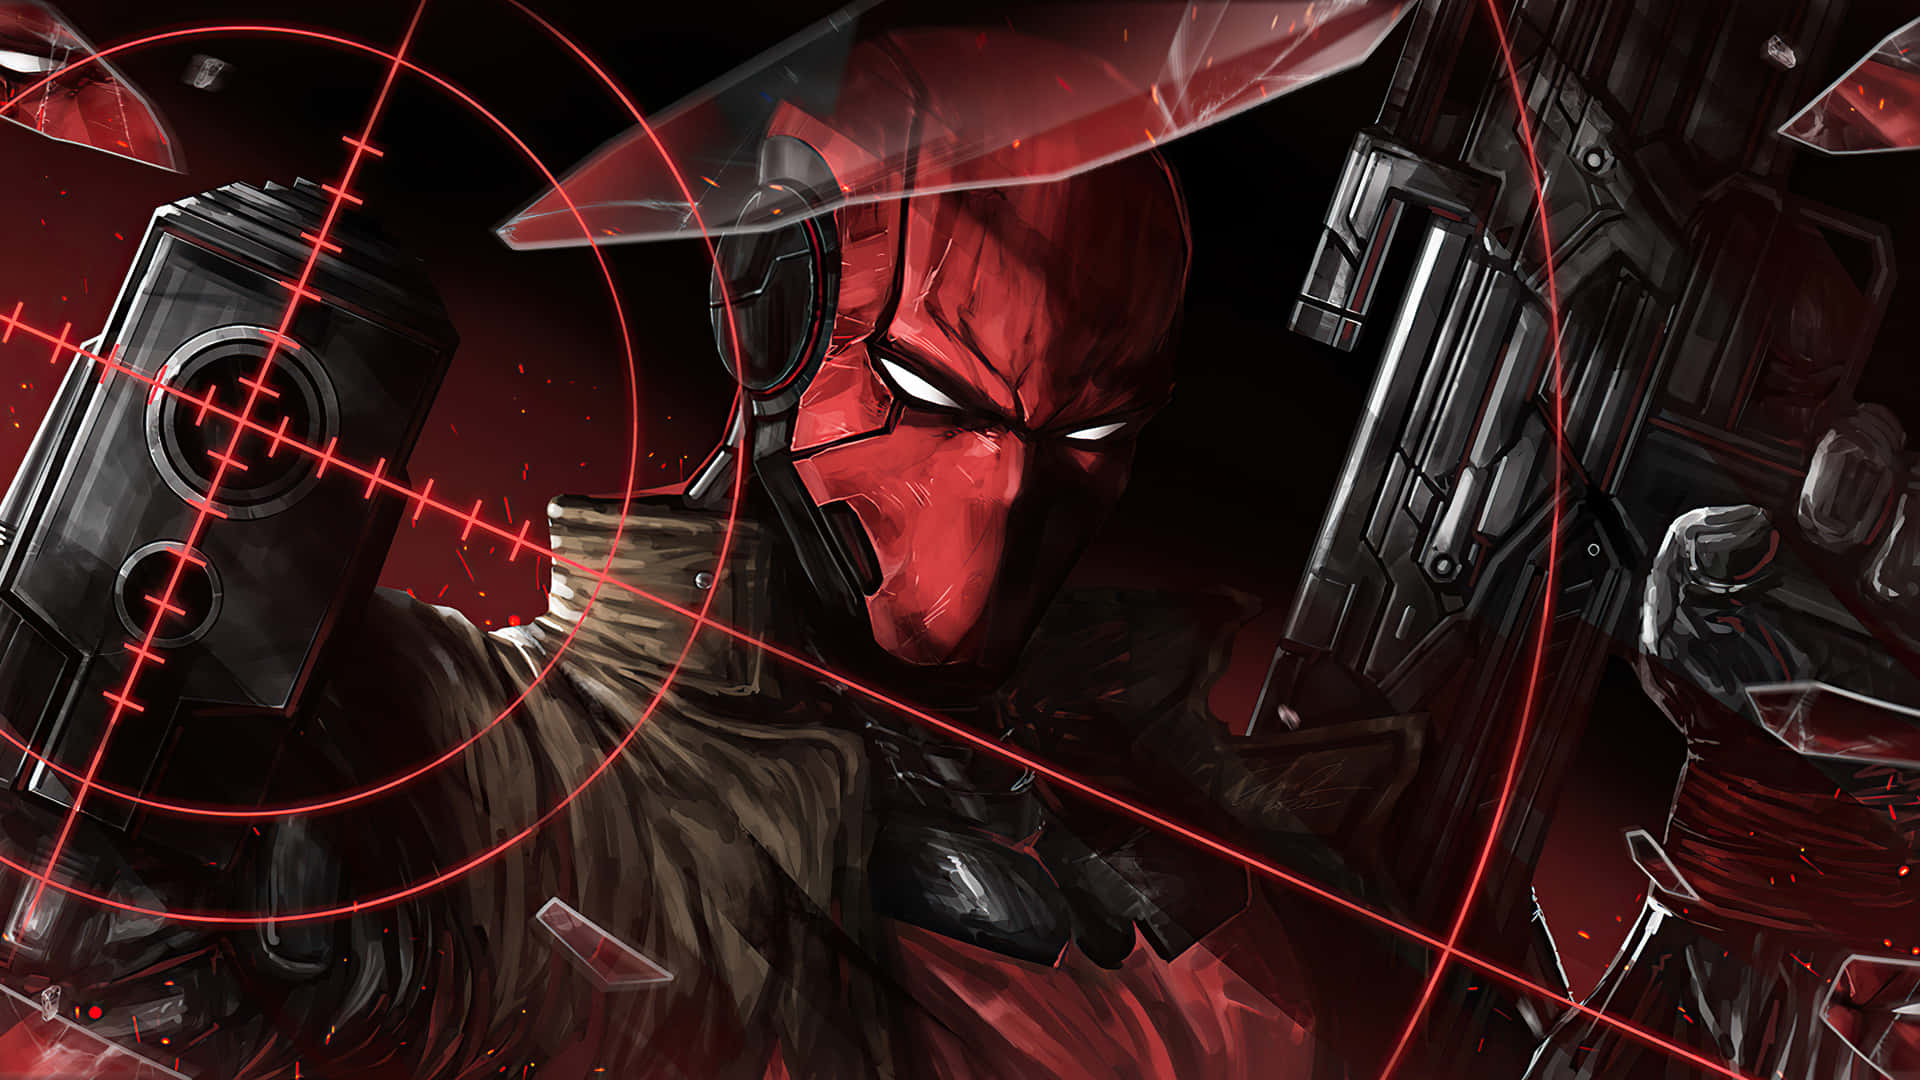 red hood and the outlaws wallpaper